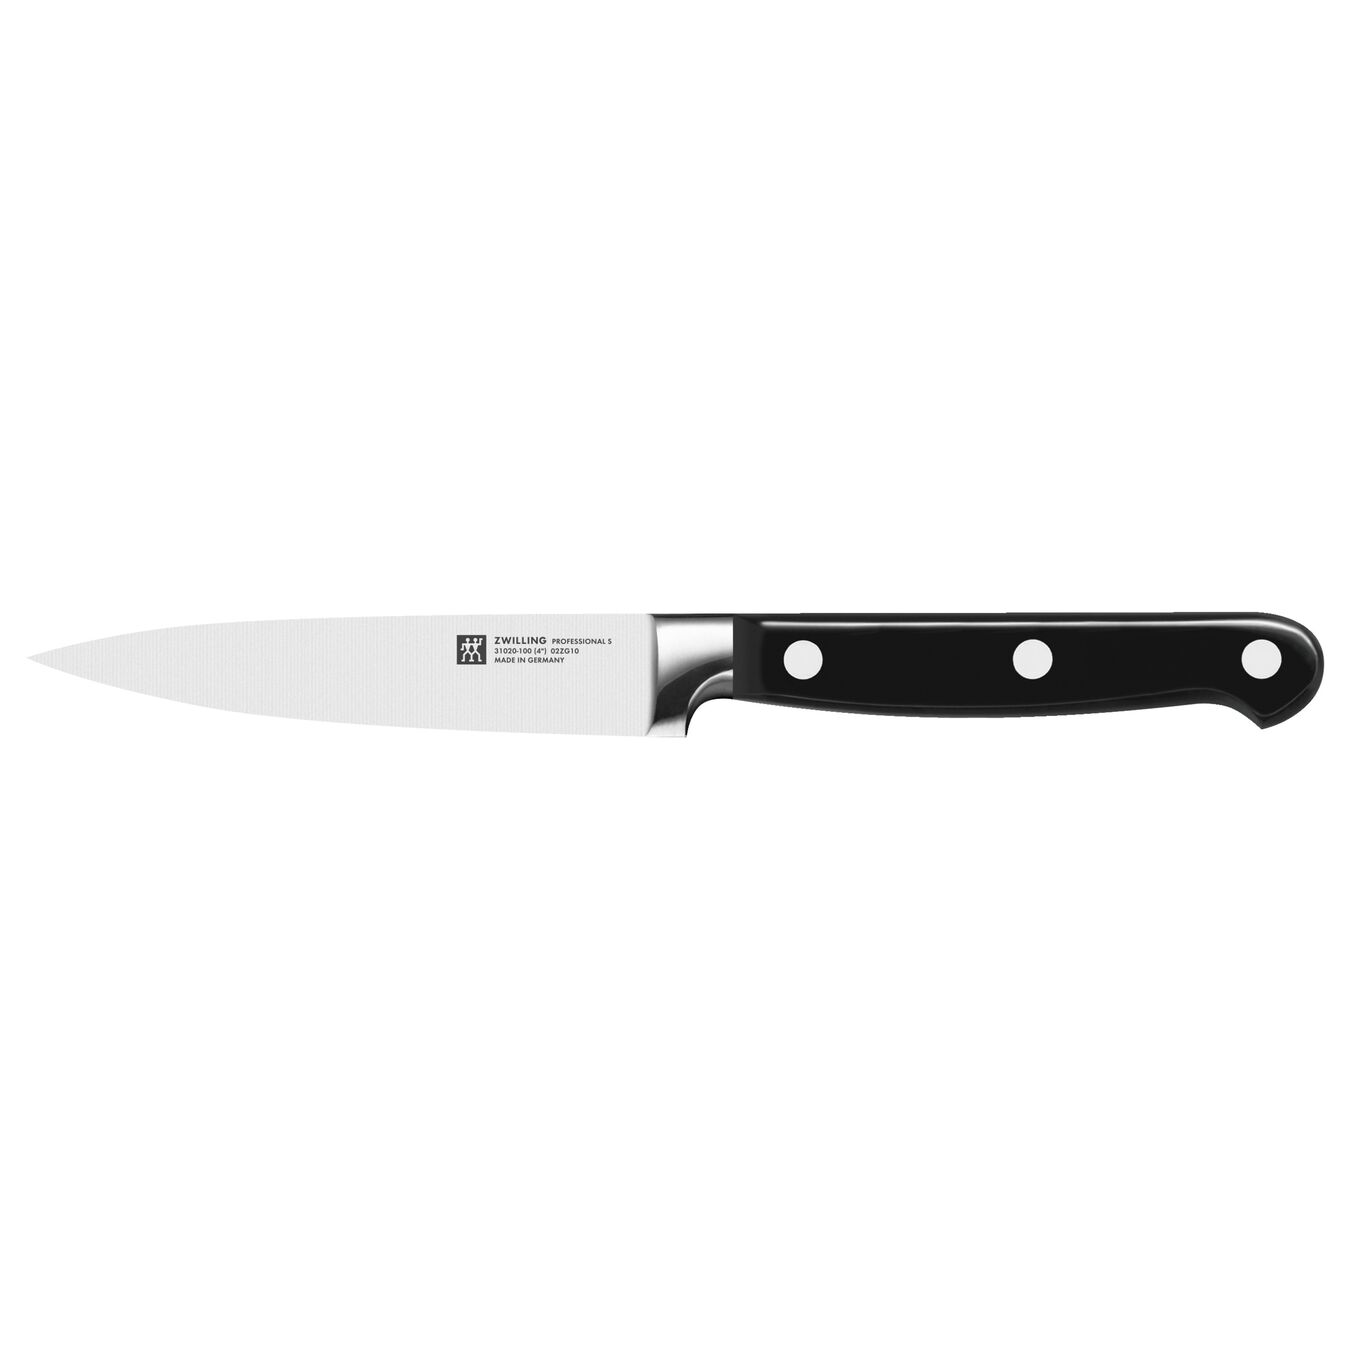 4-inch, Paring knife - Visual Imperfections,,large 1